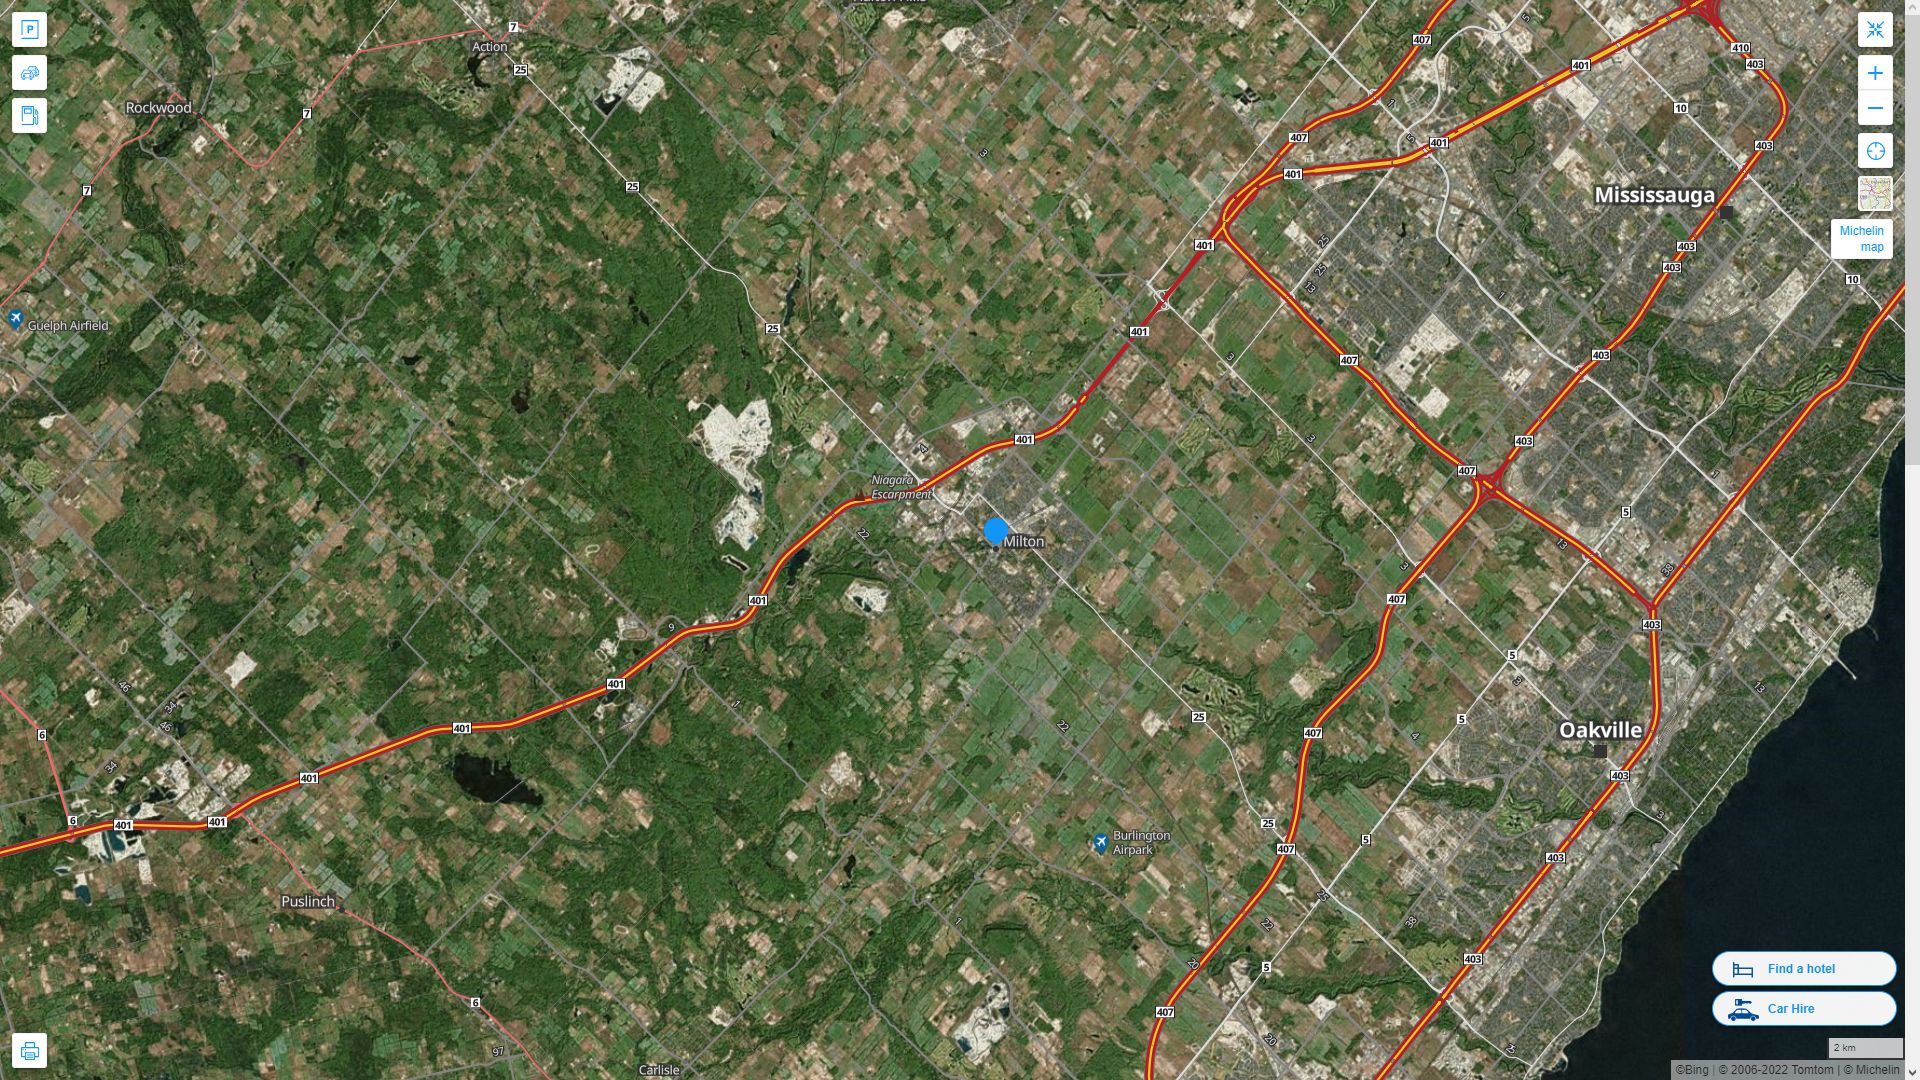 Milton Highway and Road Map with Satellite View